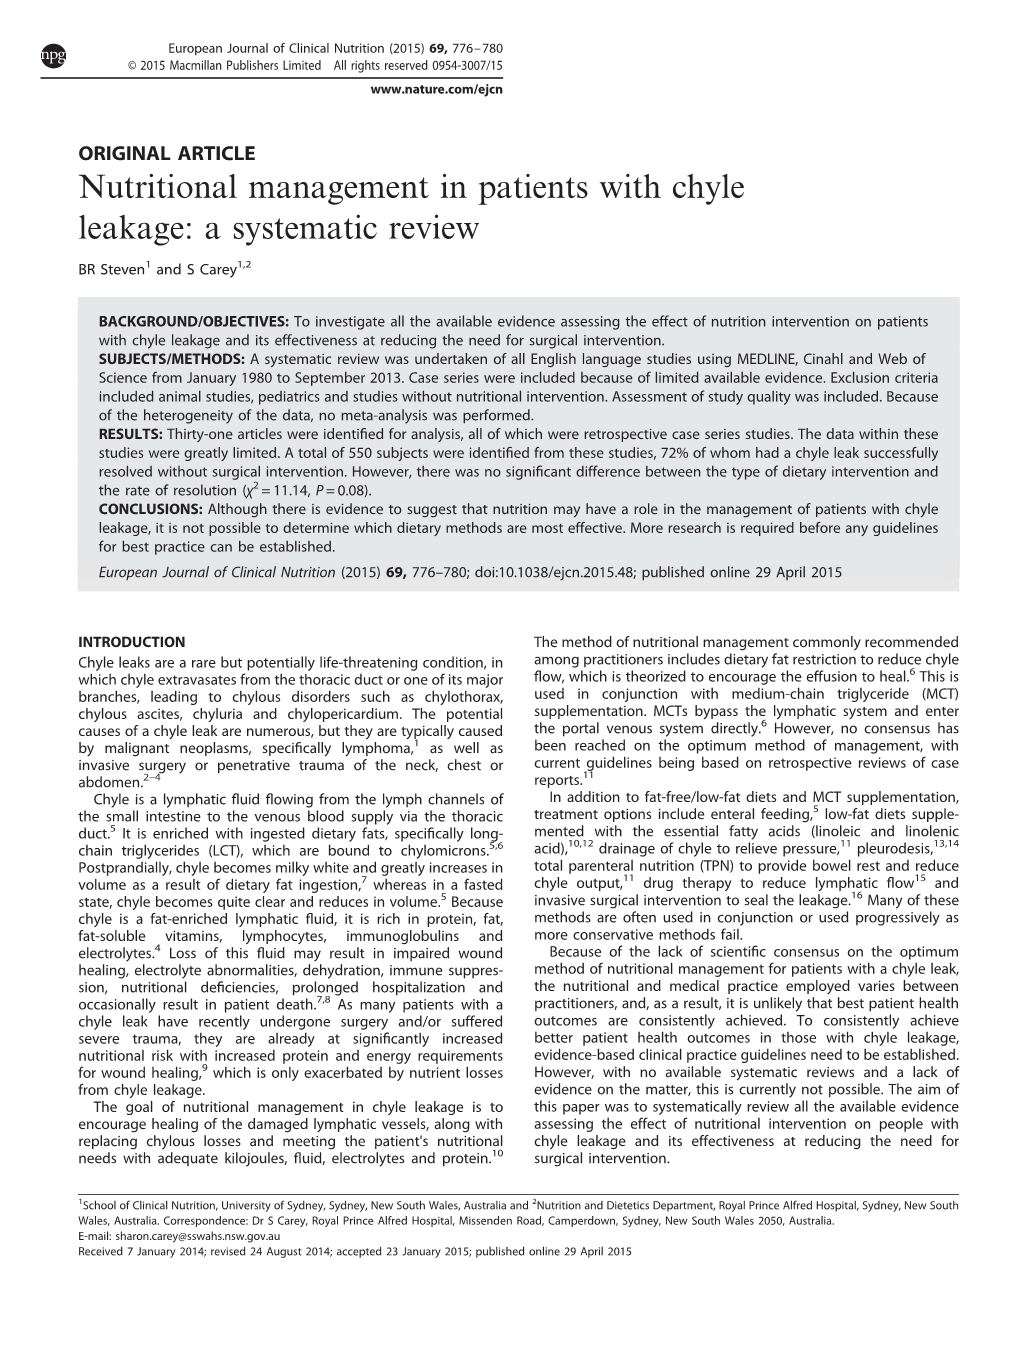 Nutritional Management in Patients with Chyle Leakage: a Systematic Review